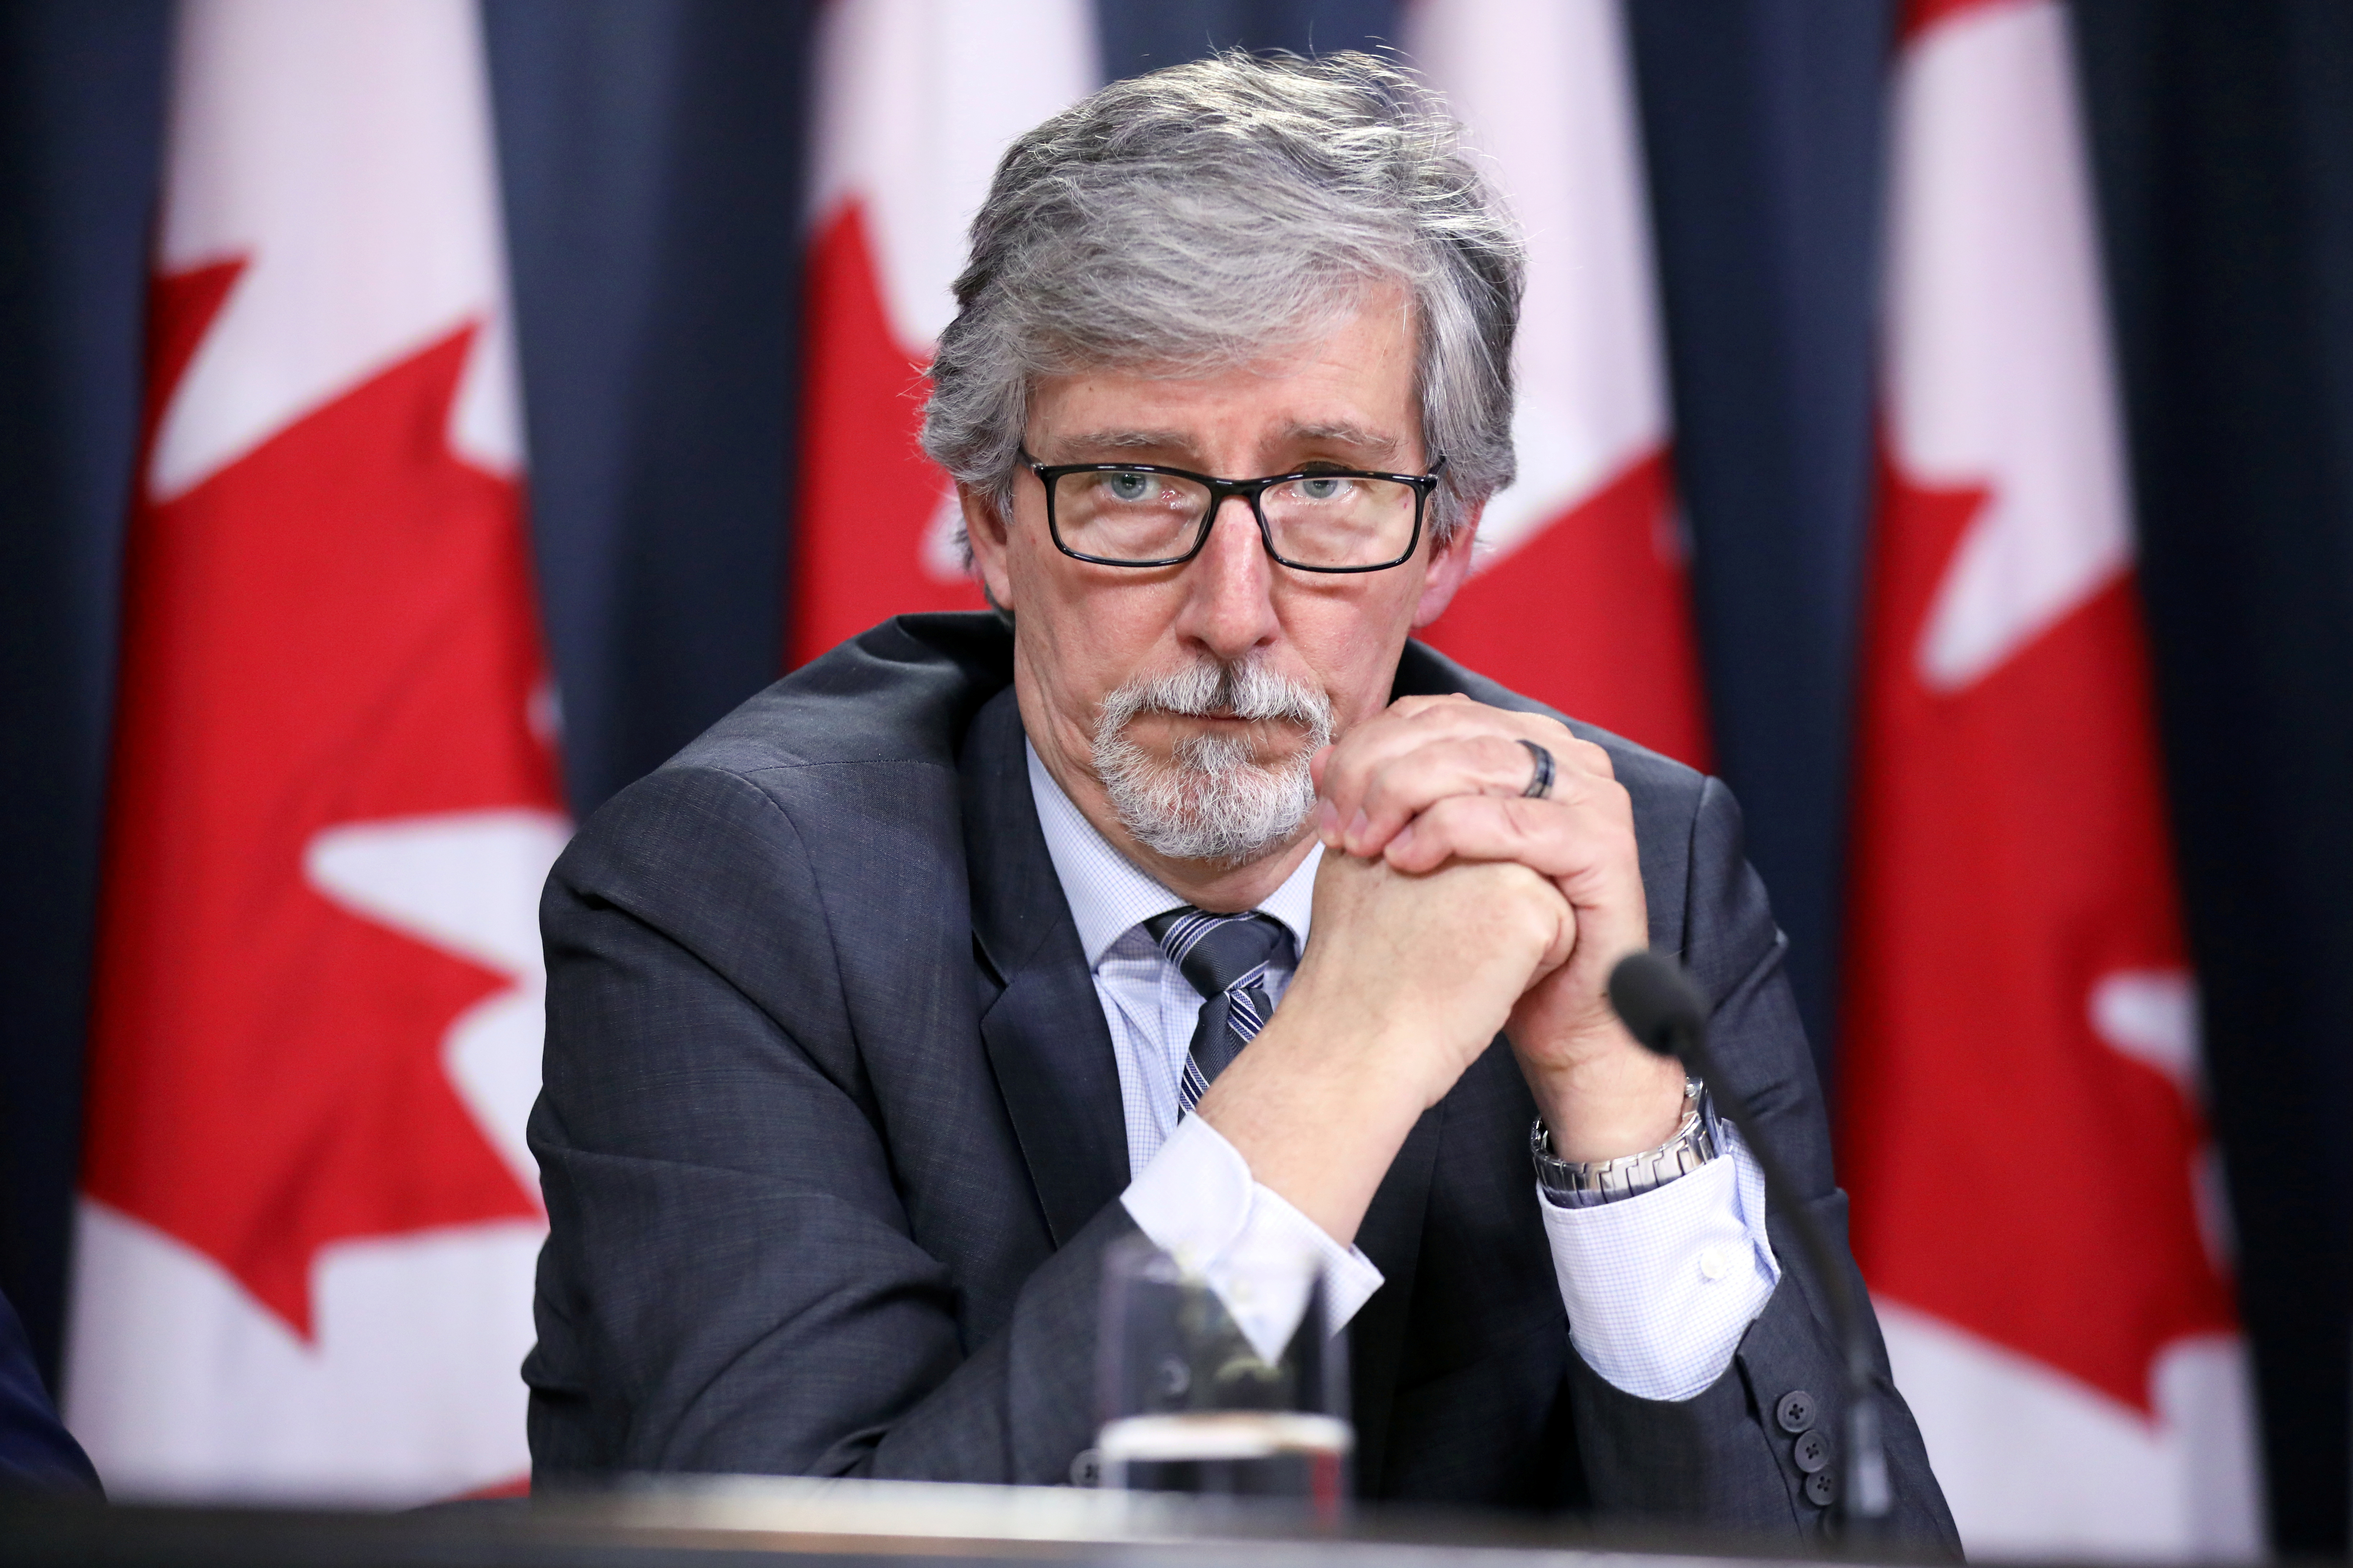 Canada's Privacy Commissioner Daniel Therrien takes part in a news conference in Ottawa